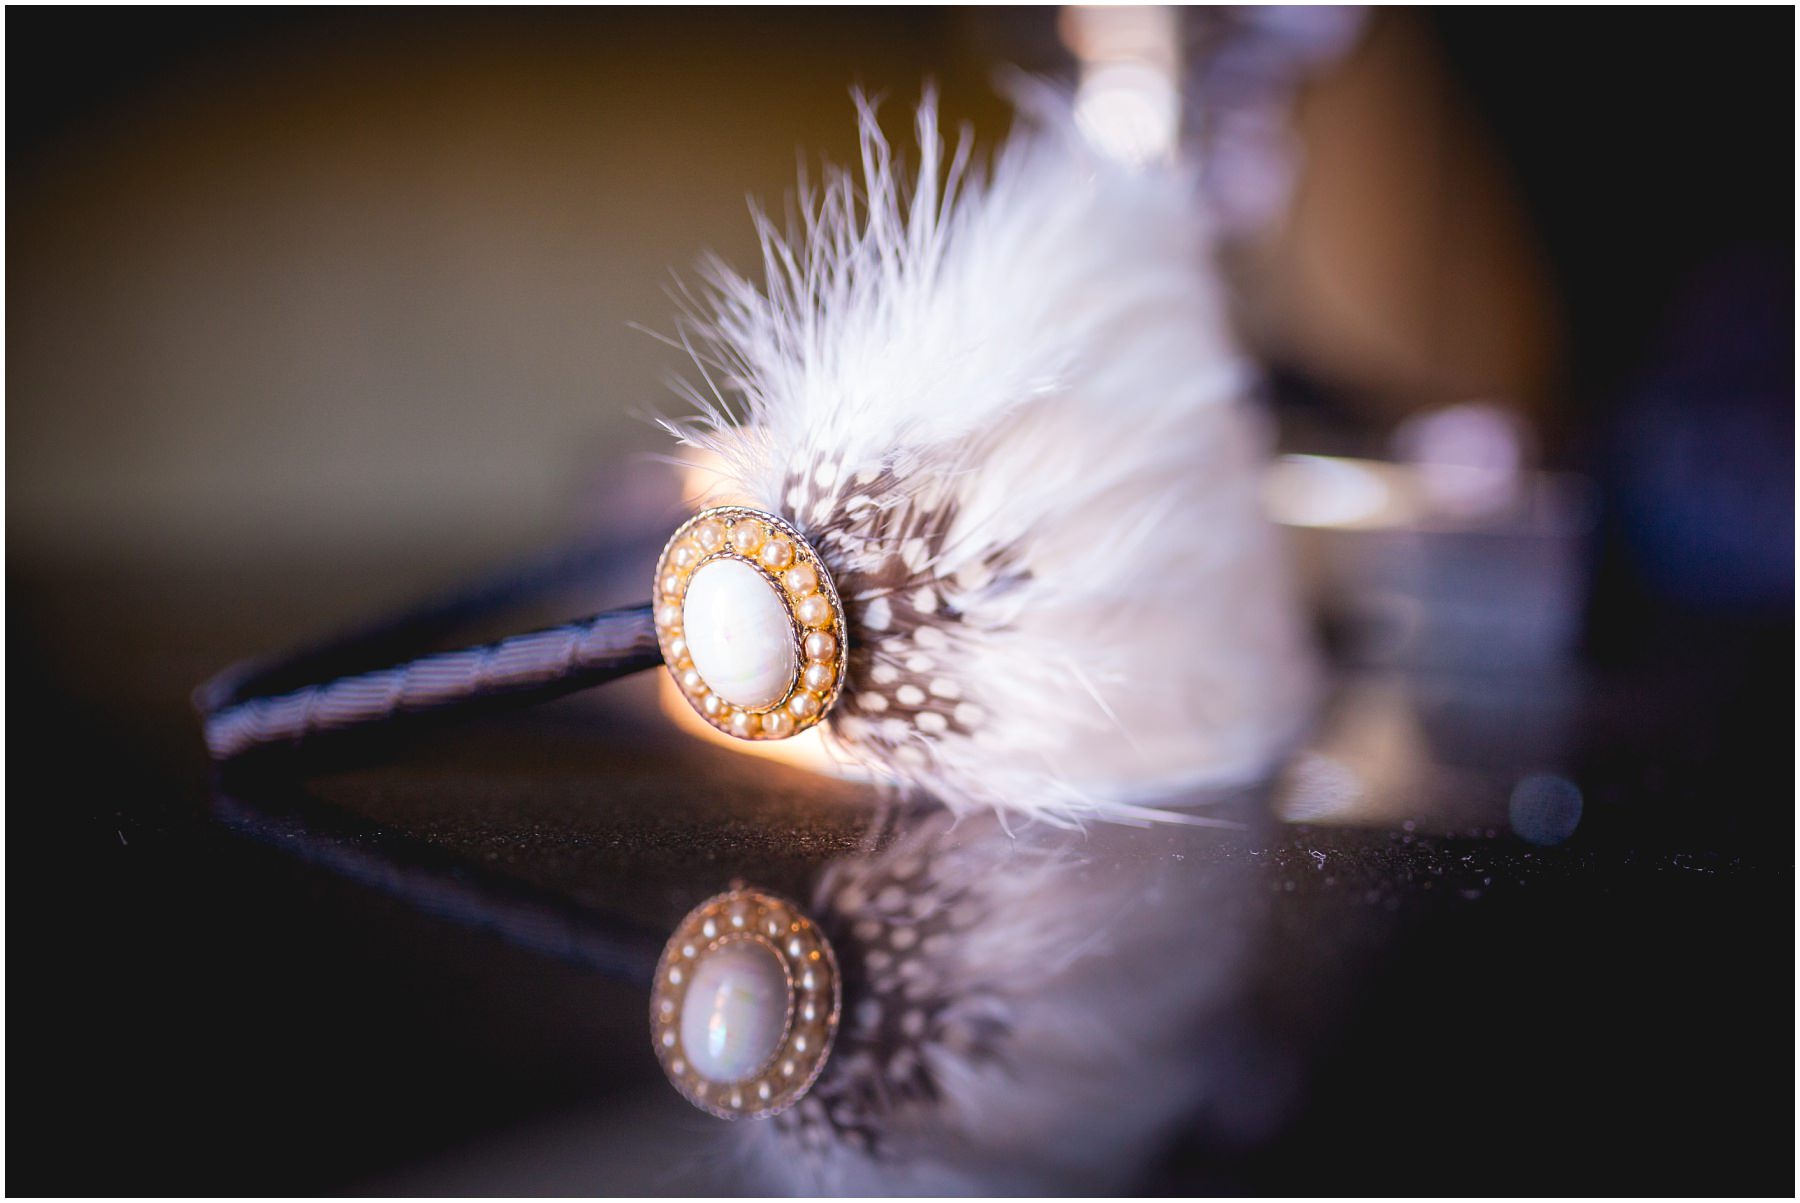 A hair accessory sat on a bedside table at the belle epoque